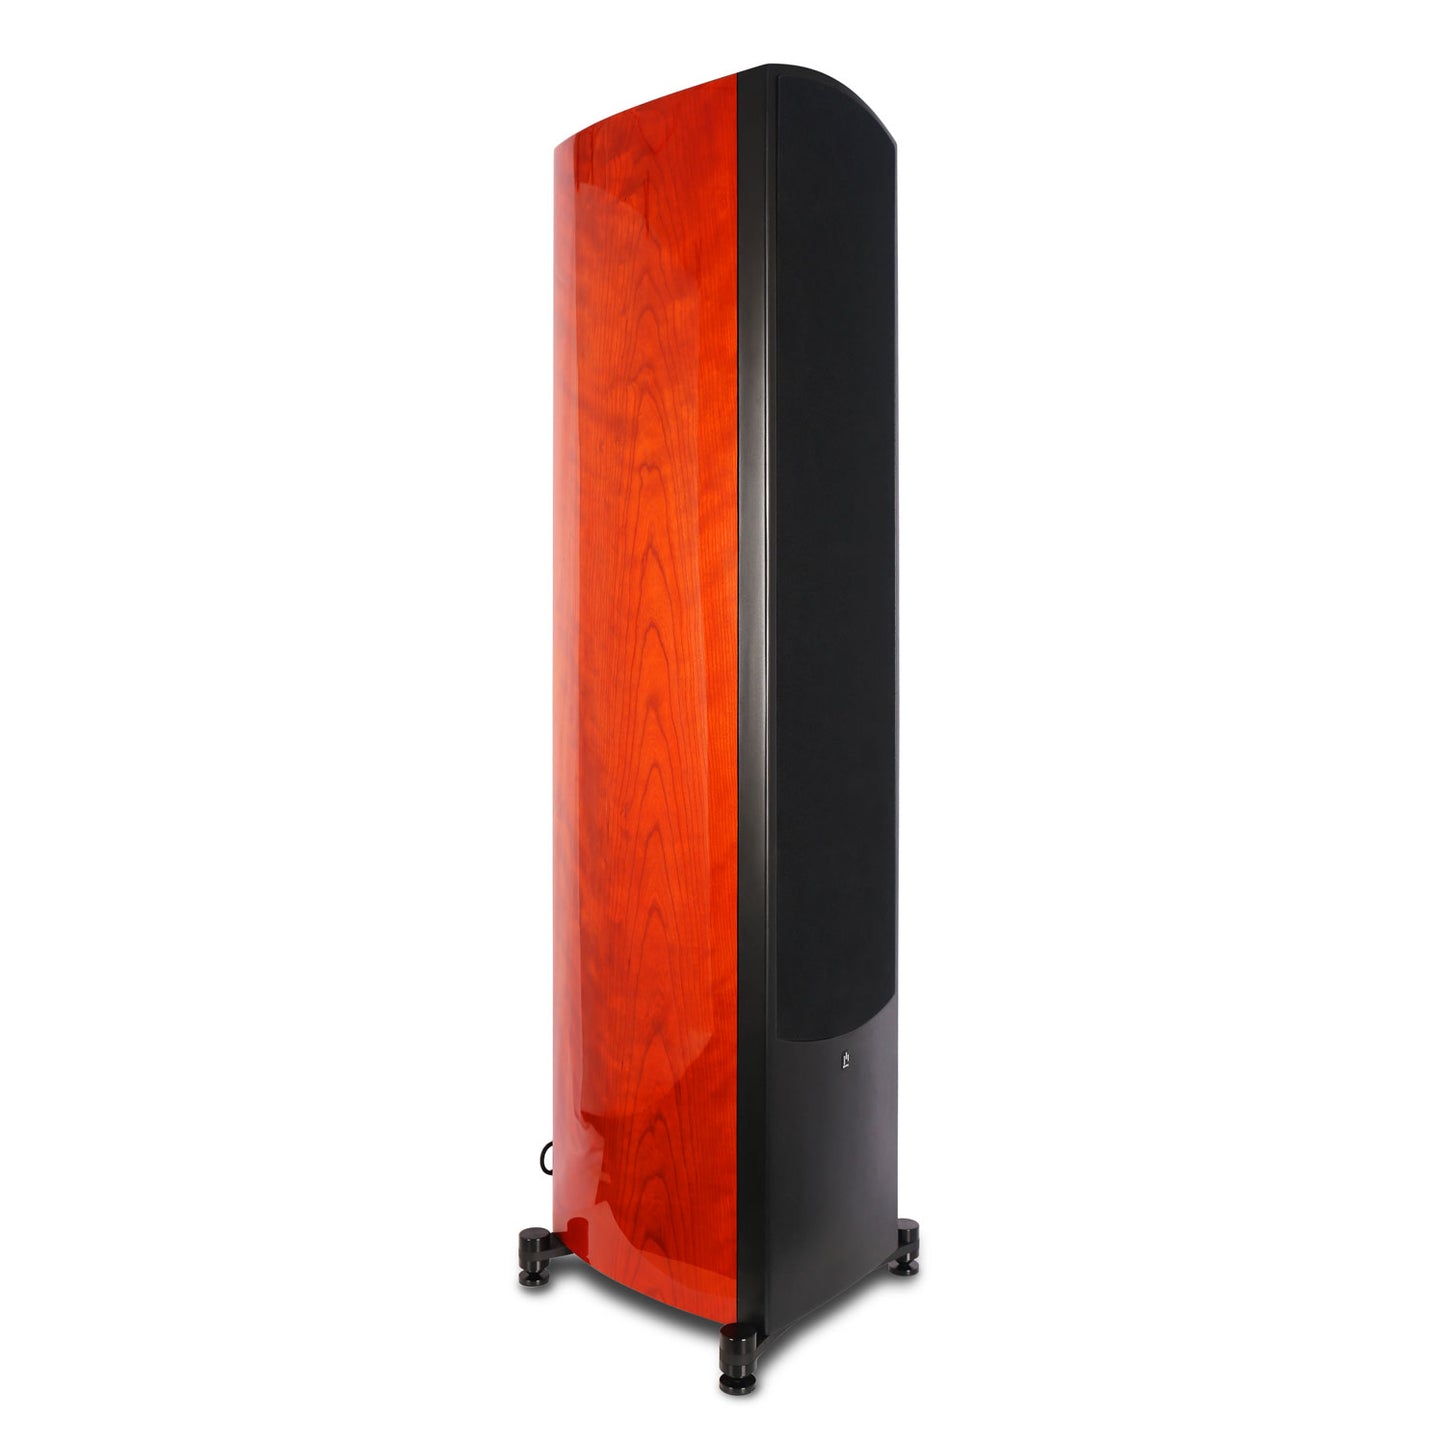 aperion-Verus-V8T-3Way-Dual-8"-Tower-Floorstanding-Speaker-GlossCherry-Side-Front-Grille-On-aperionaudio